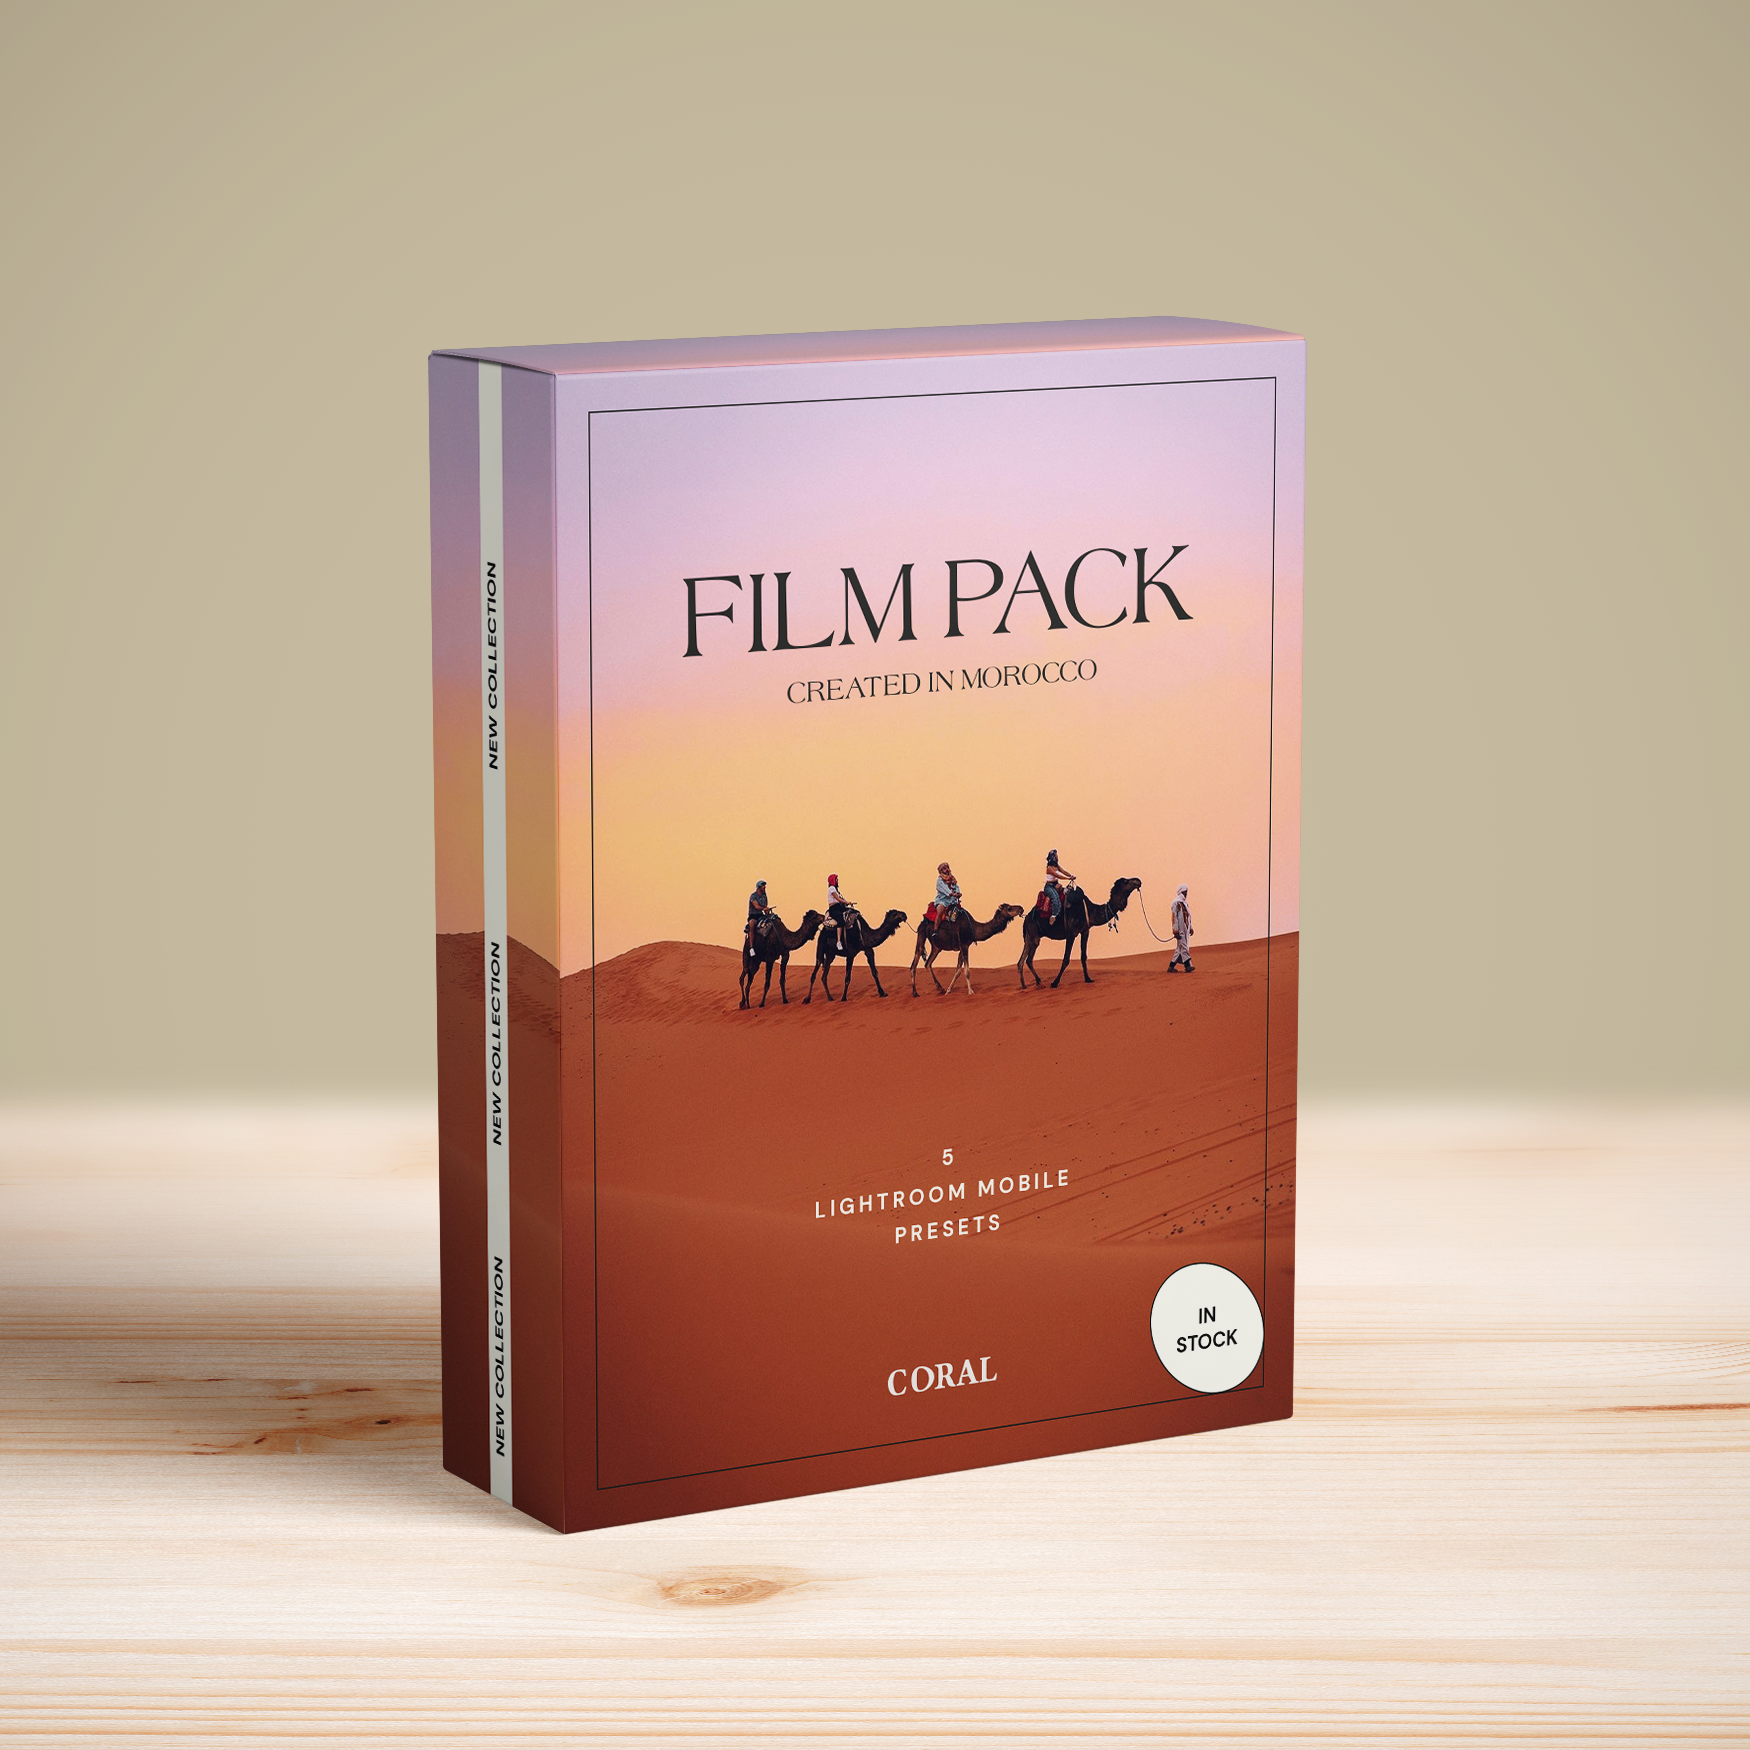 FILM PACK "Created in Morocco"